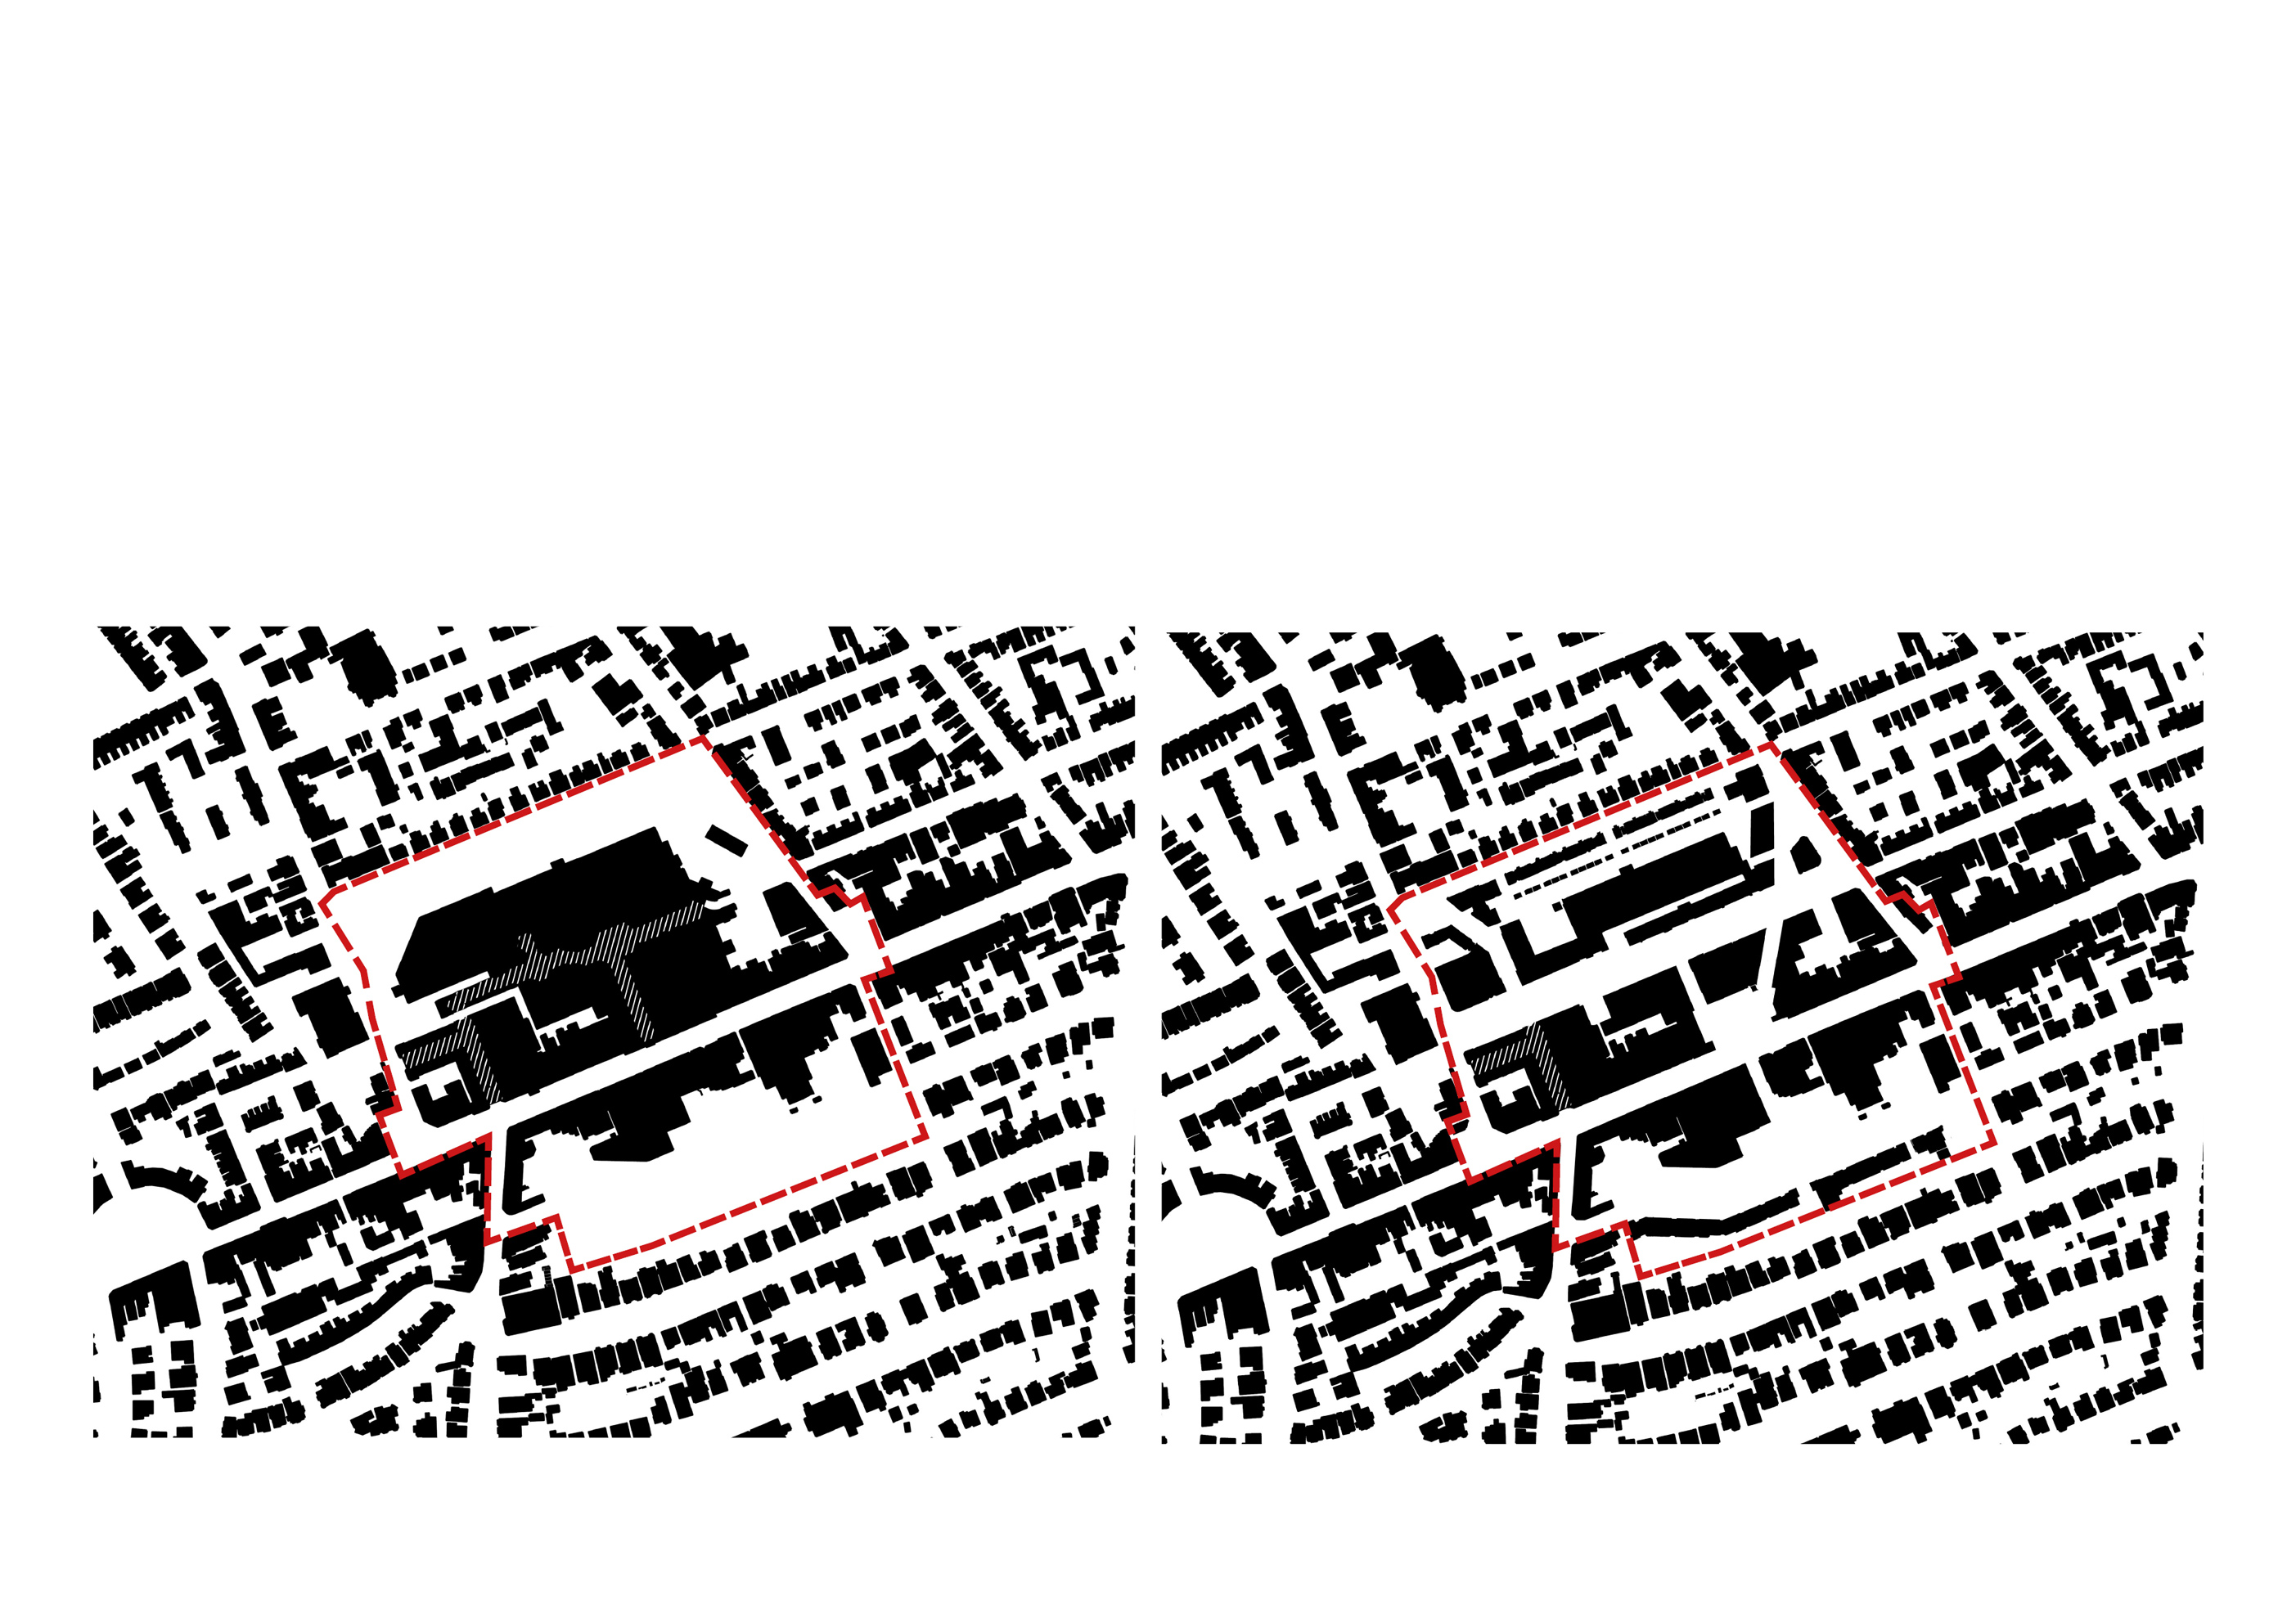 Existing figure ground (left) highlights the monolithic Sovereign Shopping Centre and the ‘land hungry’ nature of both Centenary Way and the surface level car parking on Hawkwood Road. The proposed figure ground (right) is more in keeping with the historic surrounding urban grain and improves connections into the town centre from surrounding neighbourhoods.